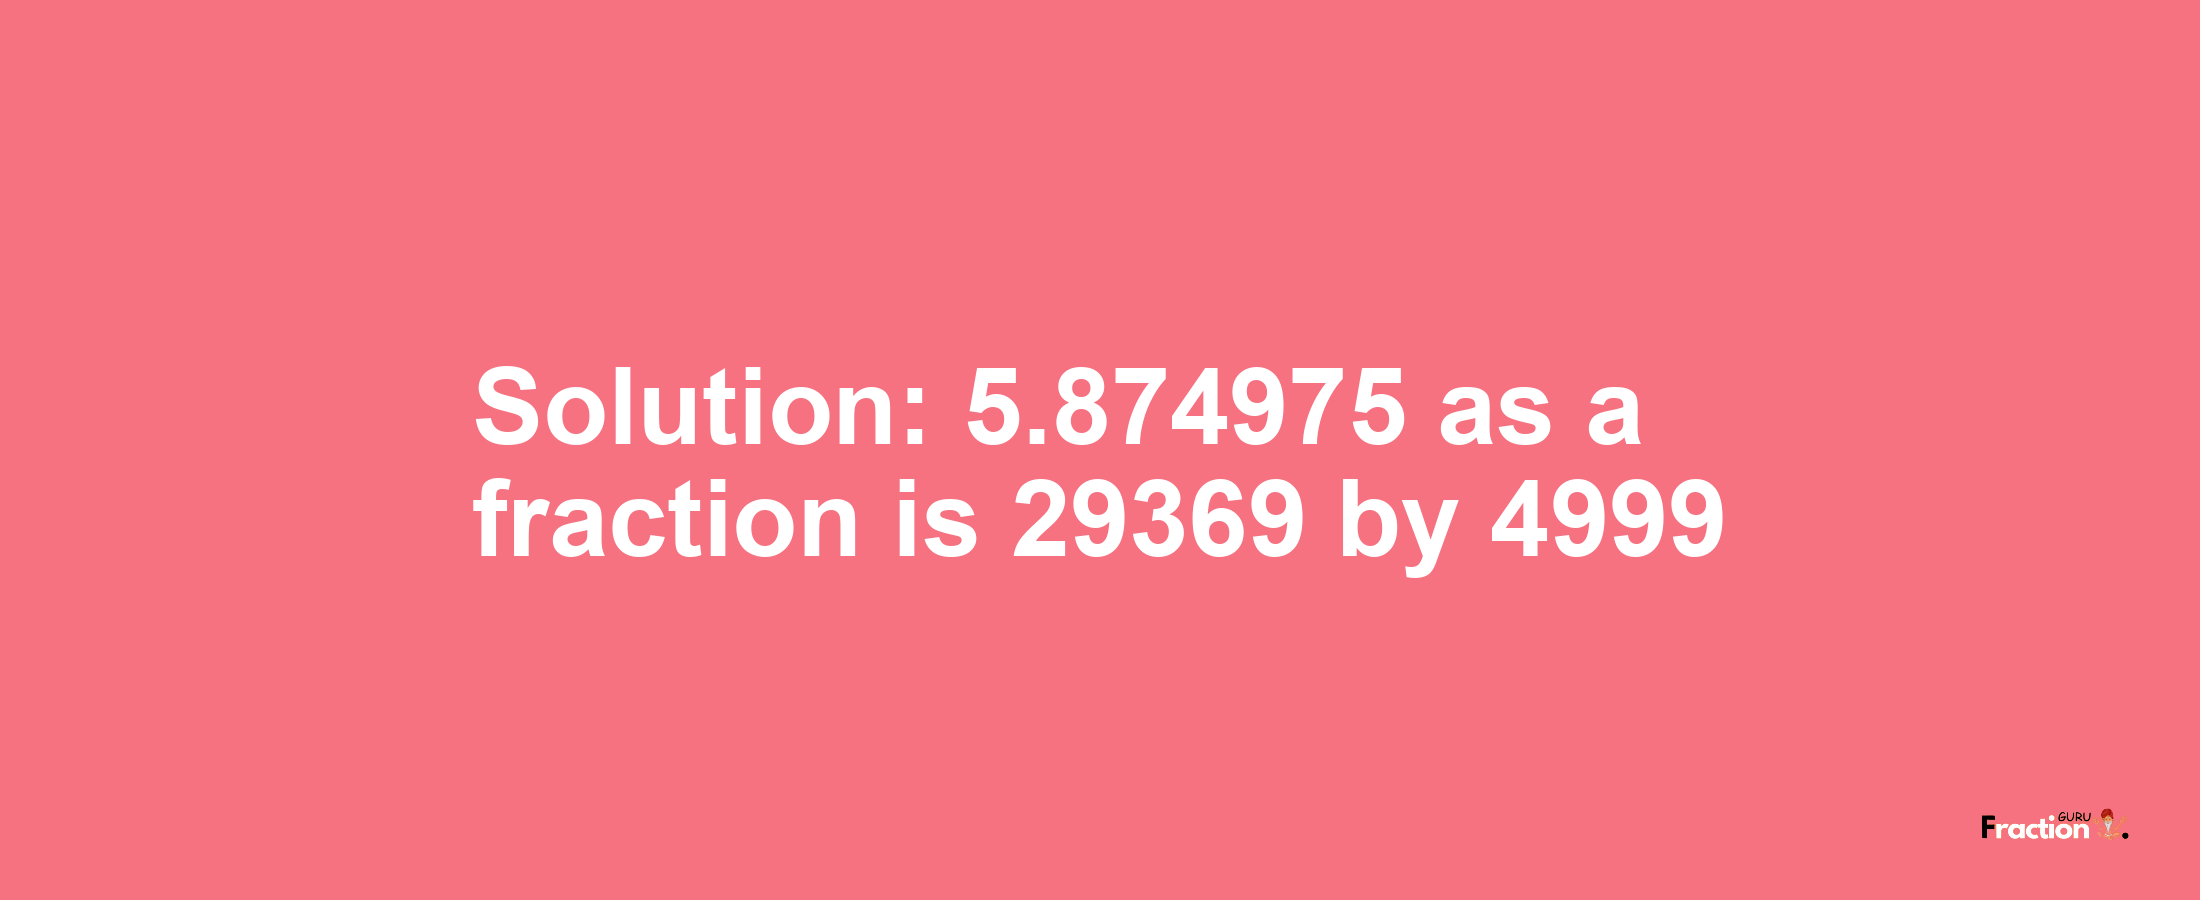 Solution:5.874975 as a fraction is 29369/4999